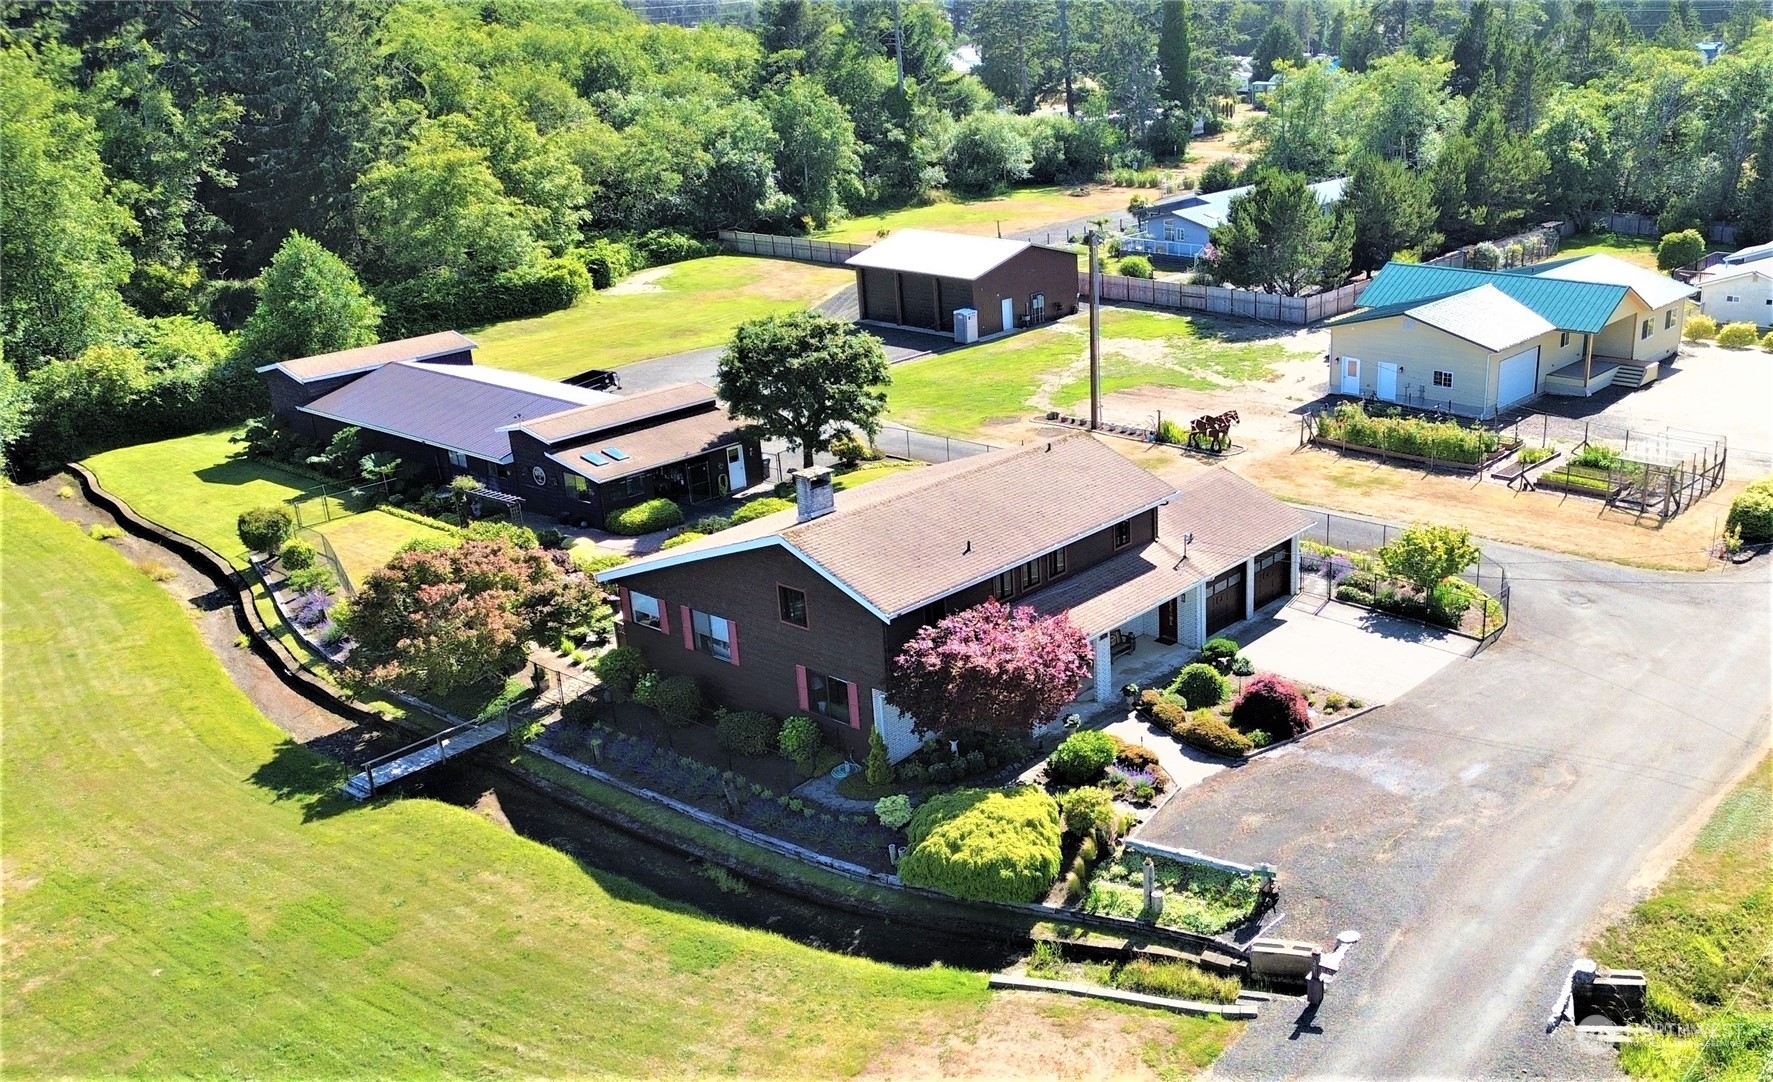 an aerial view of a house with a garden